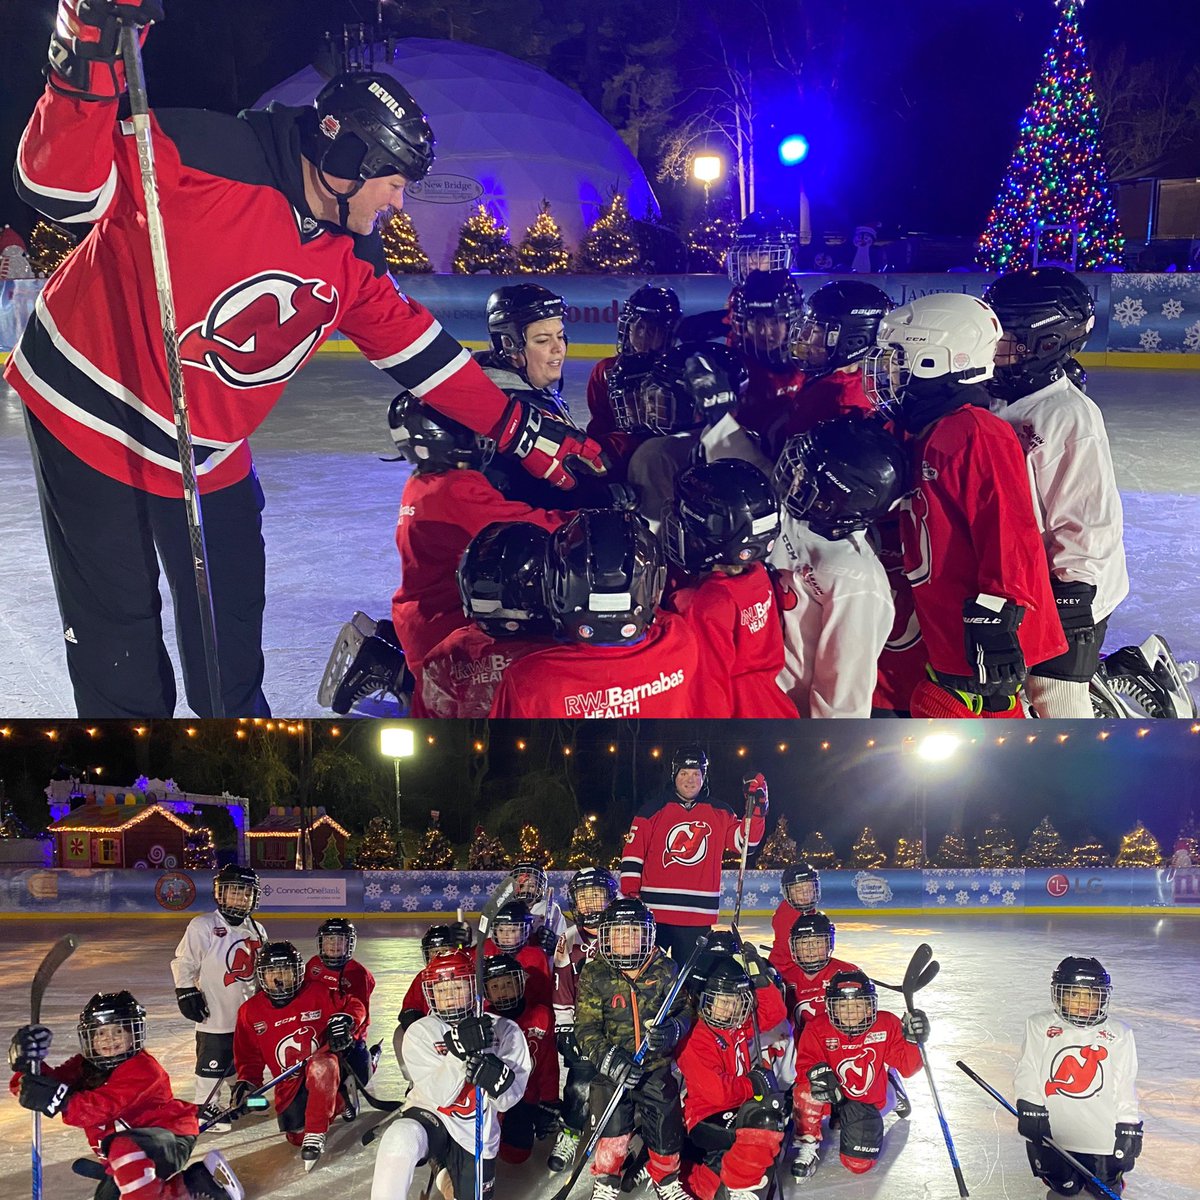 NJ Devils, NHLPA team up for statewide youth hockey initiative